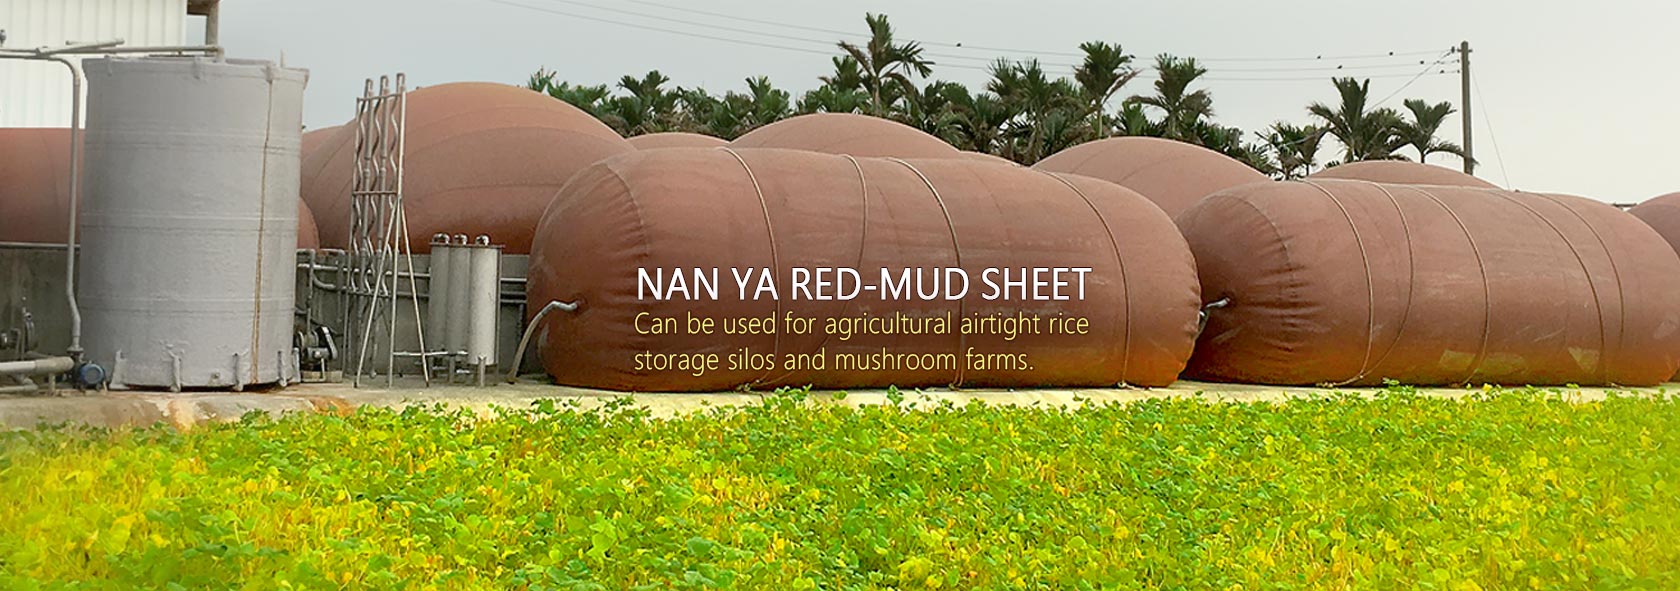 NAN YA Red Mud Sheet can be used for agricultural airtight rice storage silos and mushroom farms.